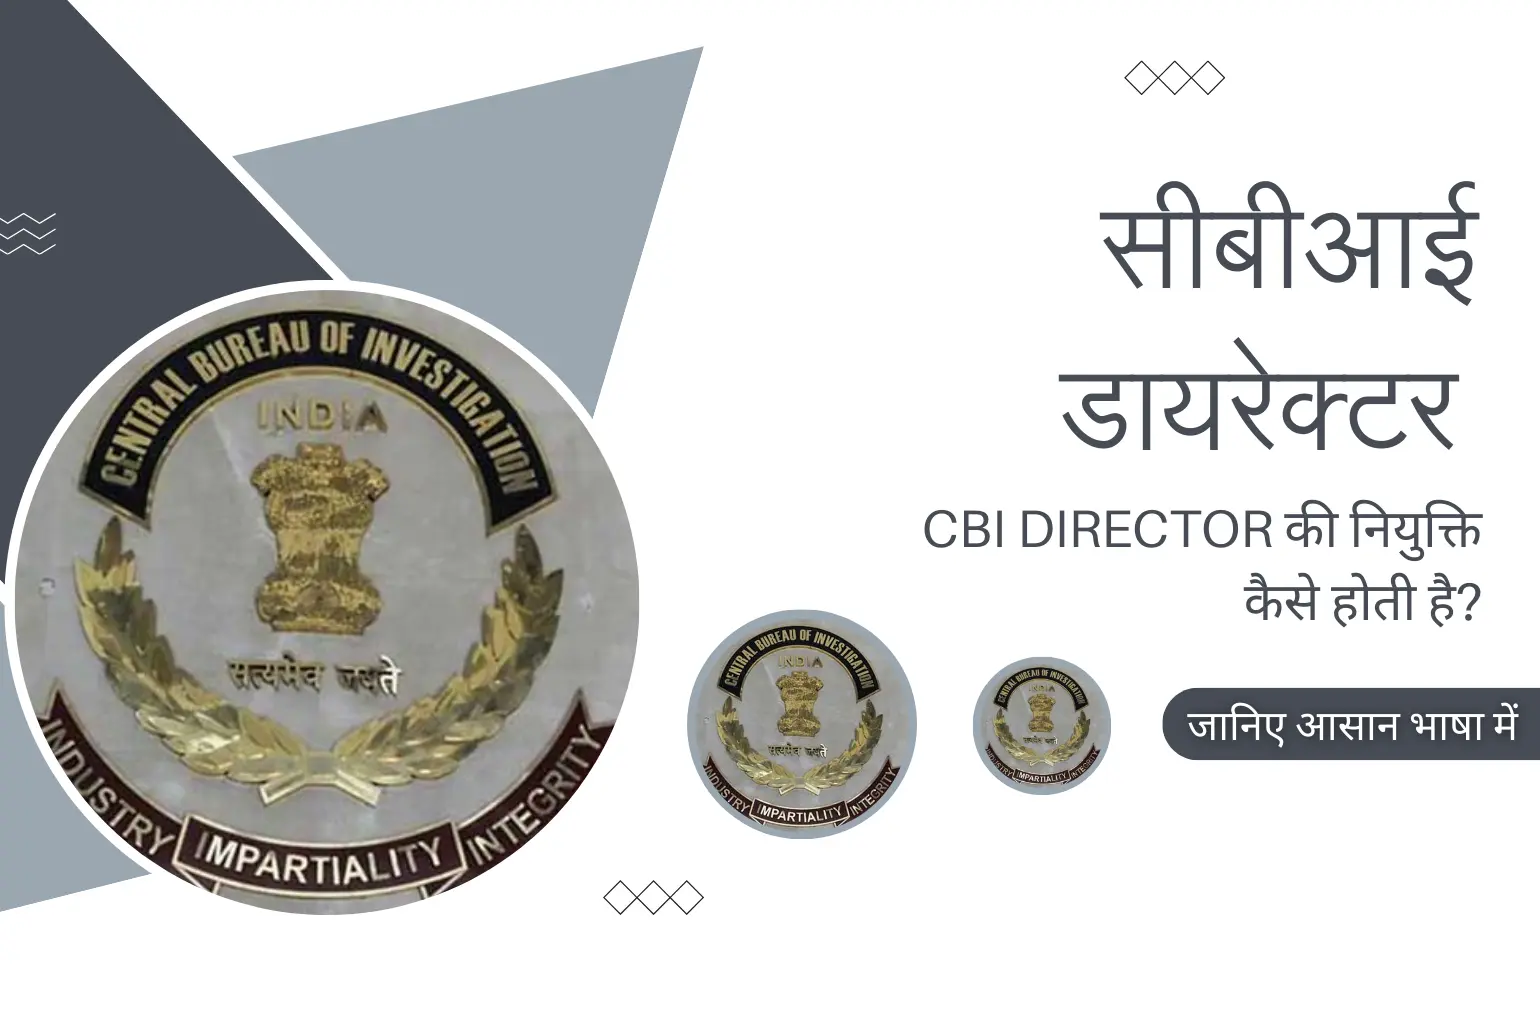 How is the CBI director appointed